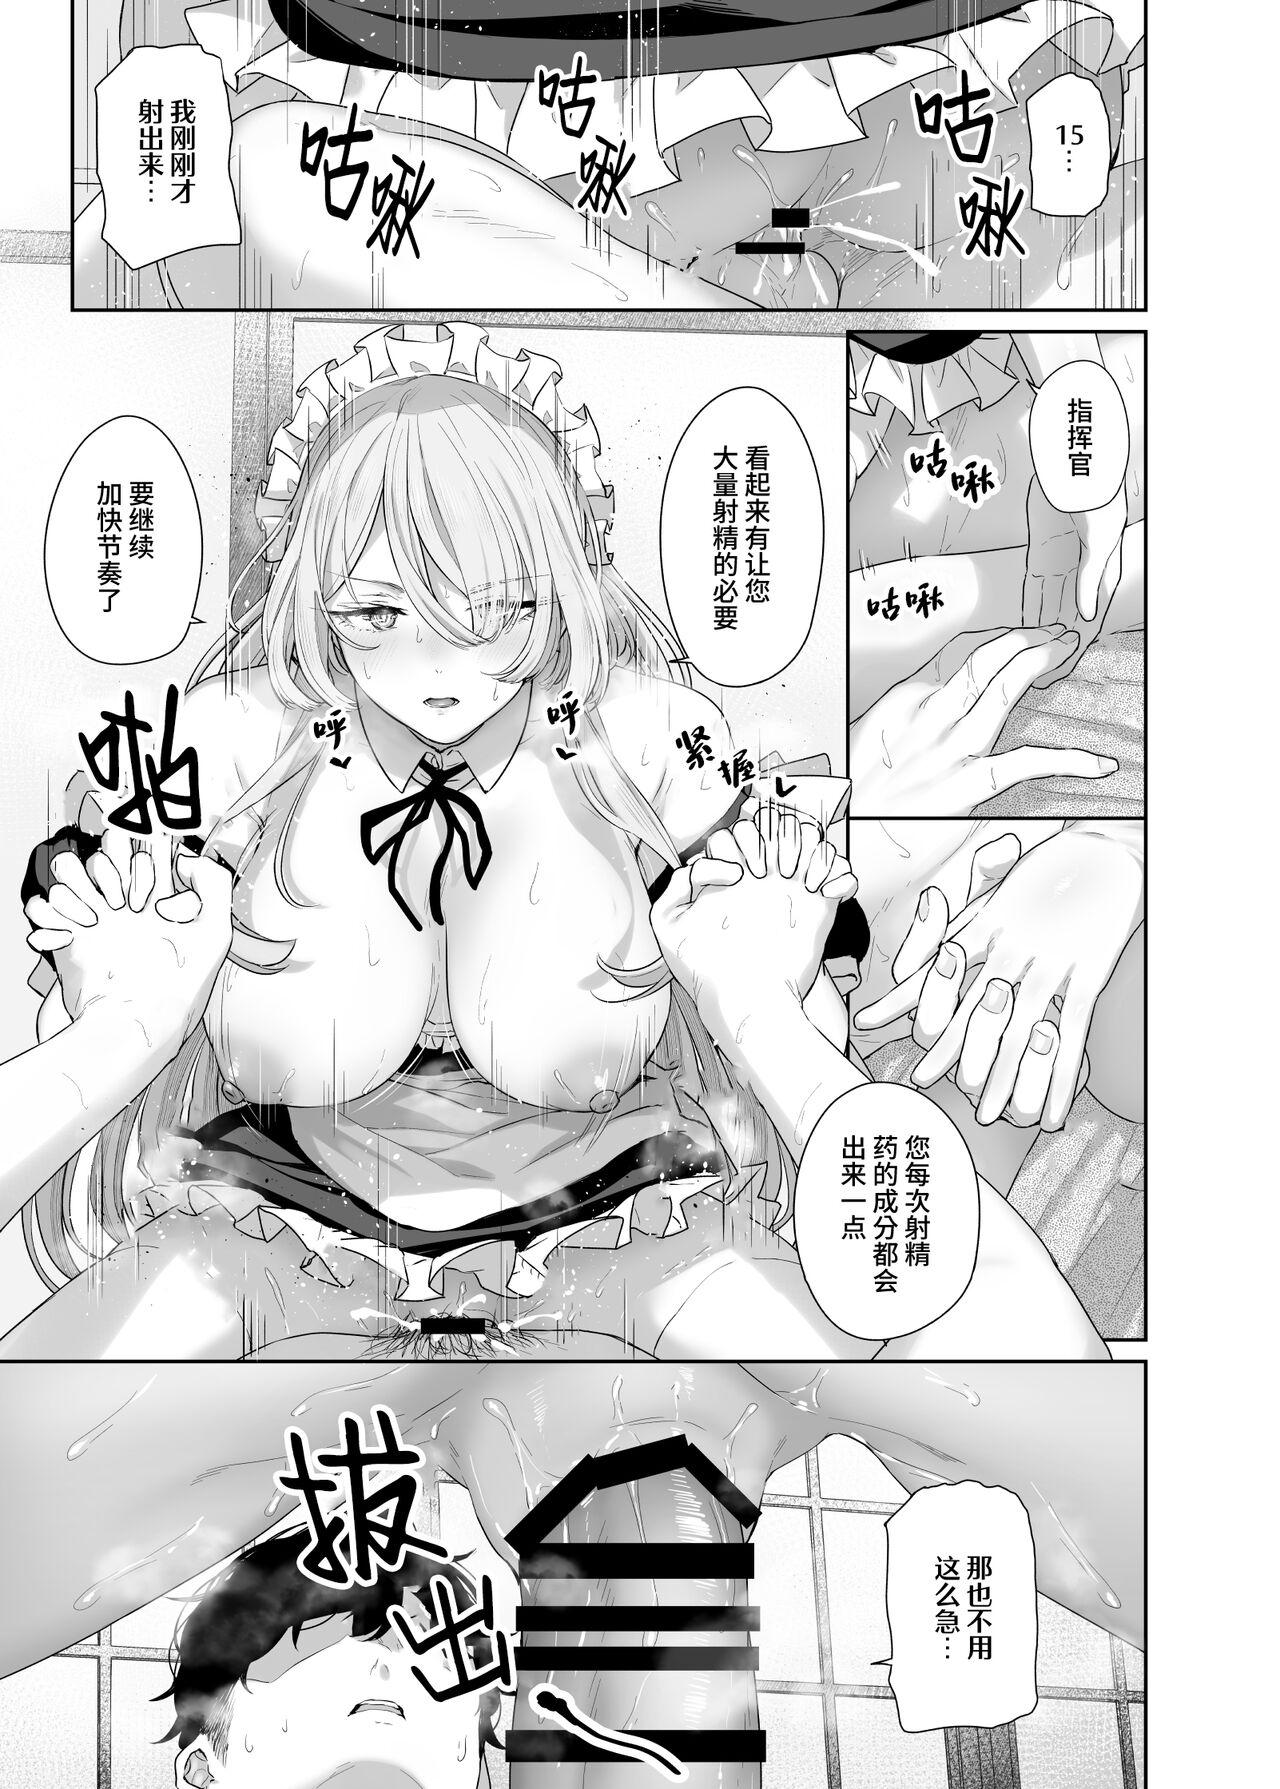 India AK15の進捗3 - Girls frontline Load - Page 8